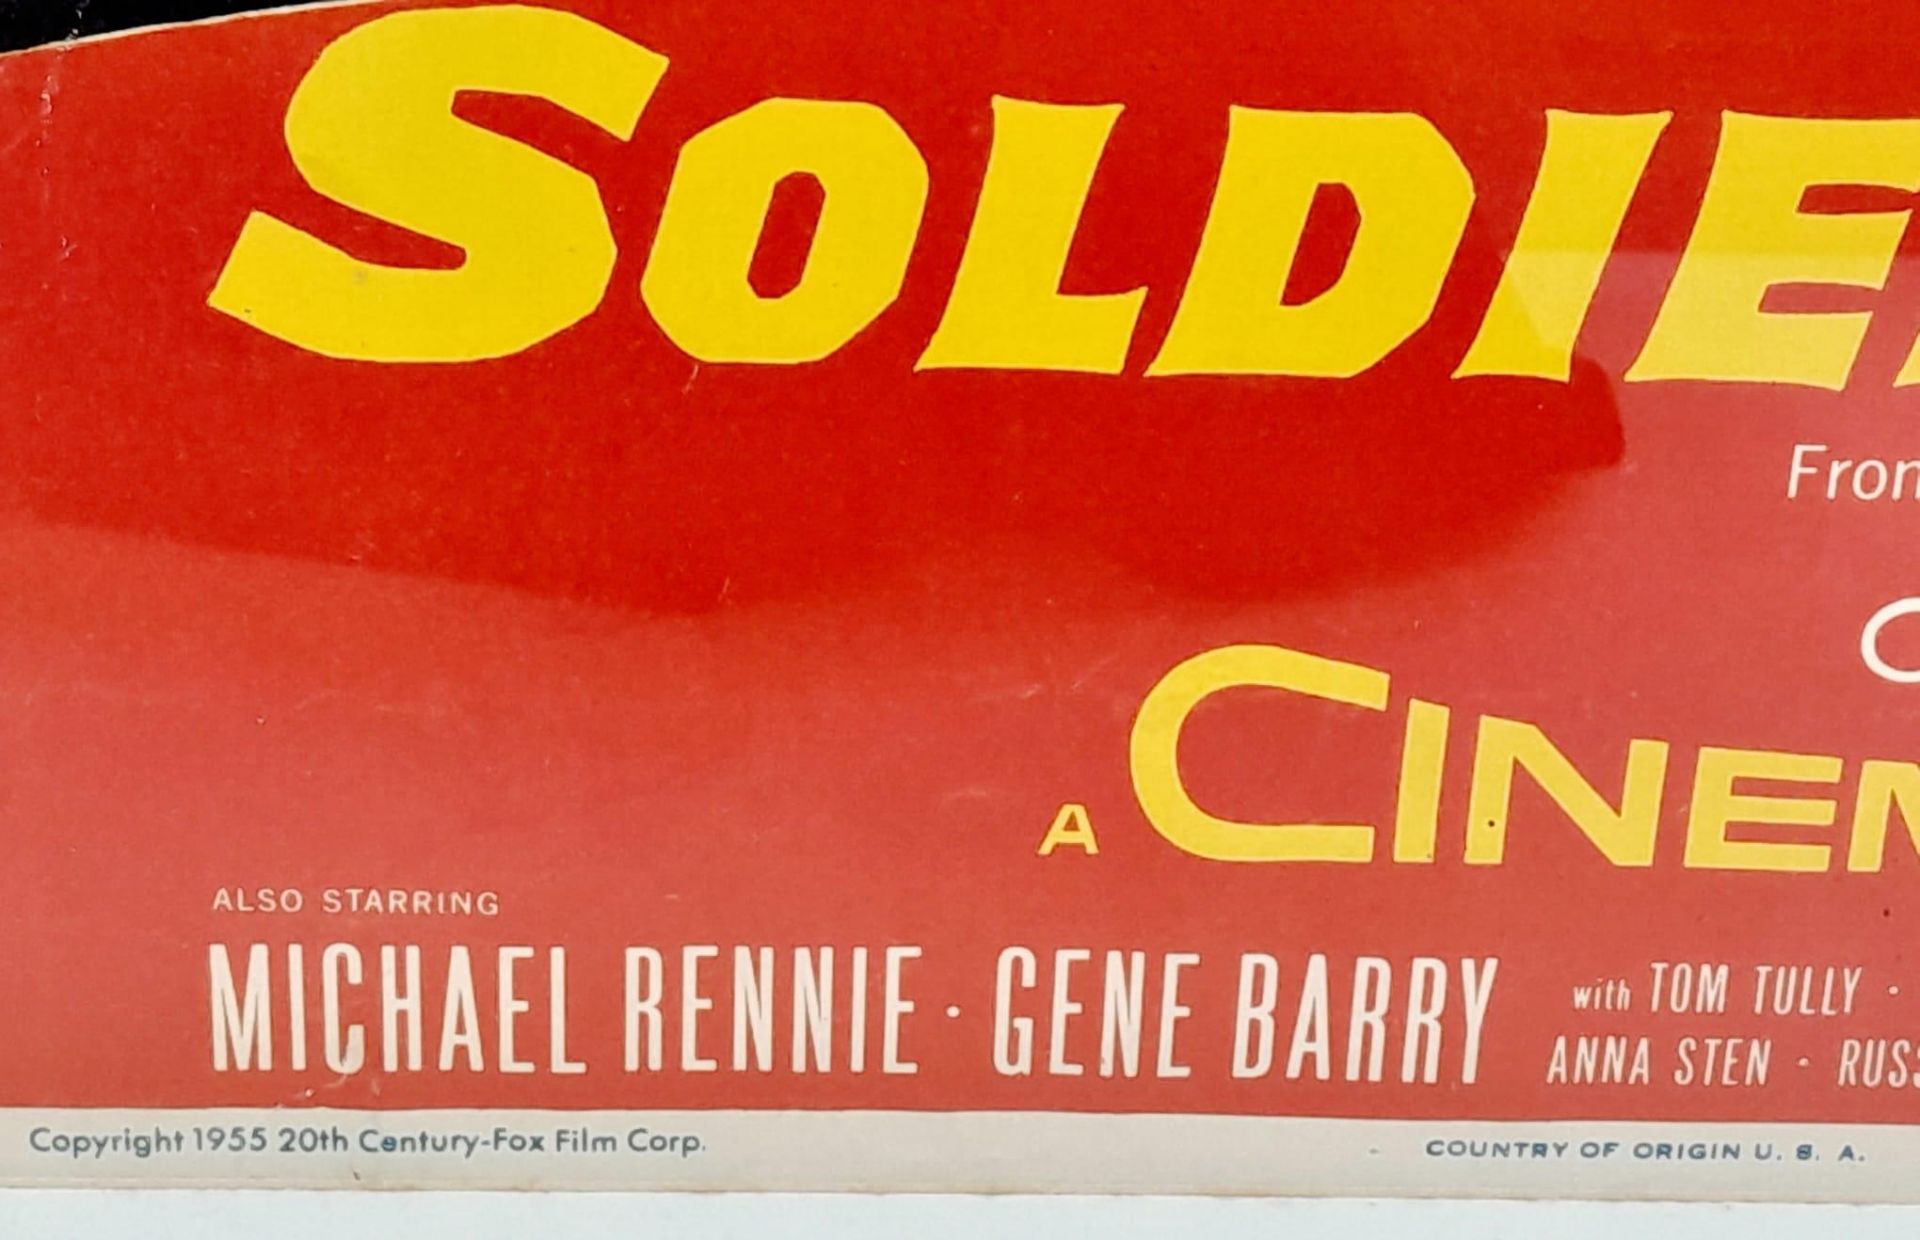 A FRAMED MOVIE POSTER FOR "SOLDIERS OF FORTUNE" STARRING CLARK GABLE AND SUSAN HAYWOOD .CIRCA 1955 . - Image 4 of 5